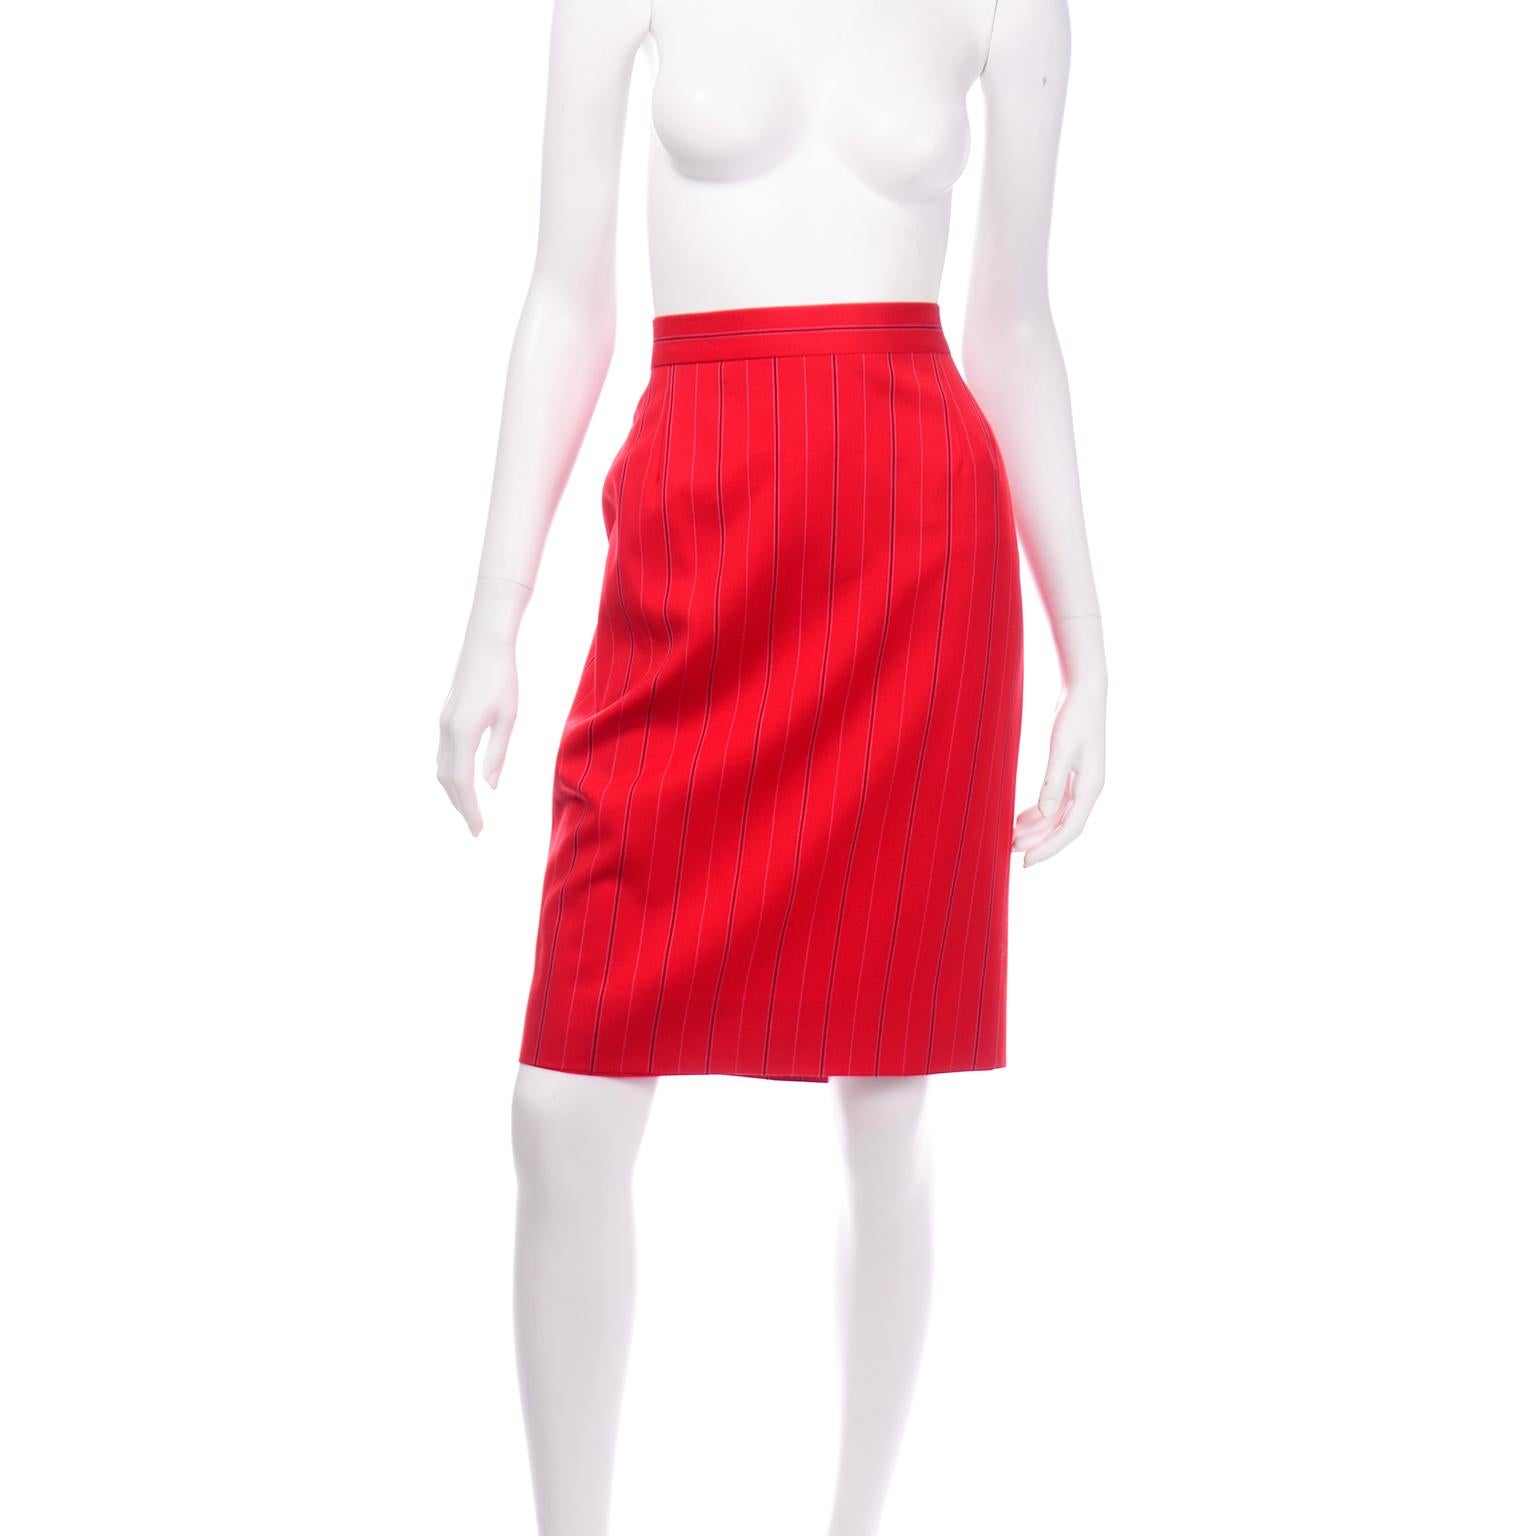 This vintage Escada Margaretha Ley pencil skirt is a beautiful red summer weight wool with pink and black vertical pinstripes. The narrow waistband has a back button and a metal zipper down the center back for closure. There is small kick pleat at